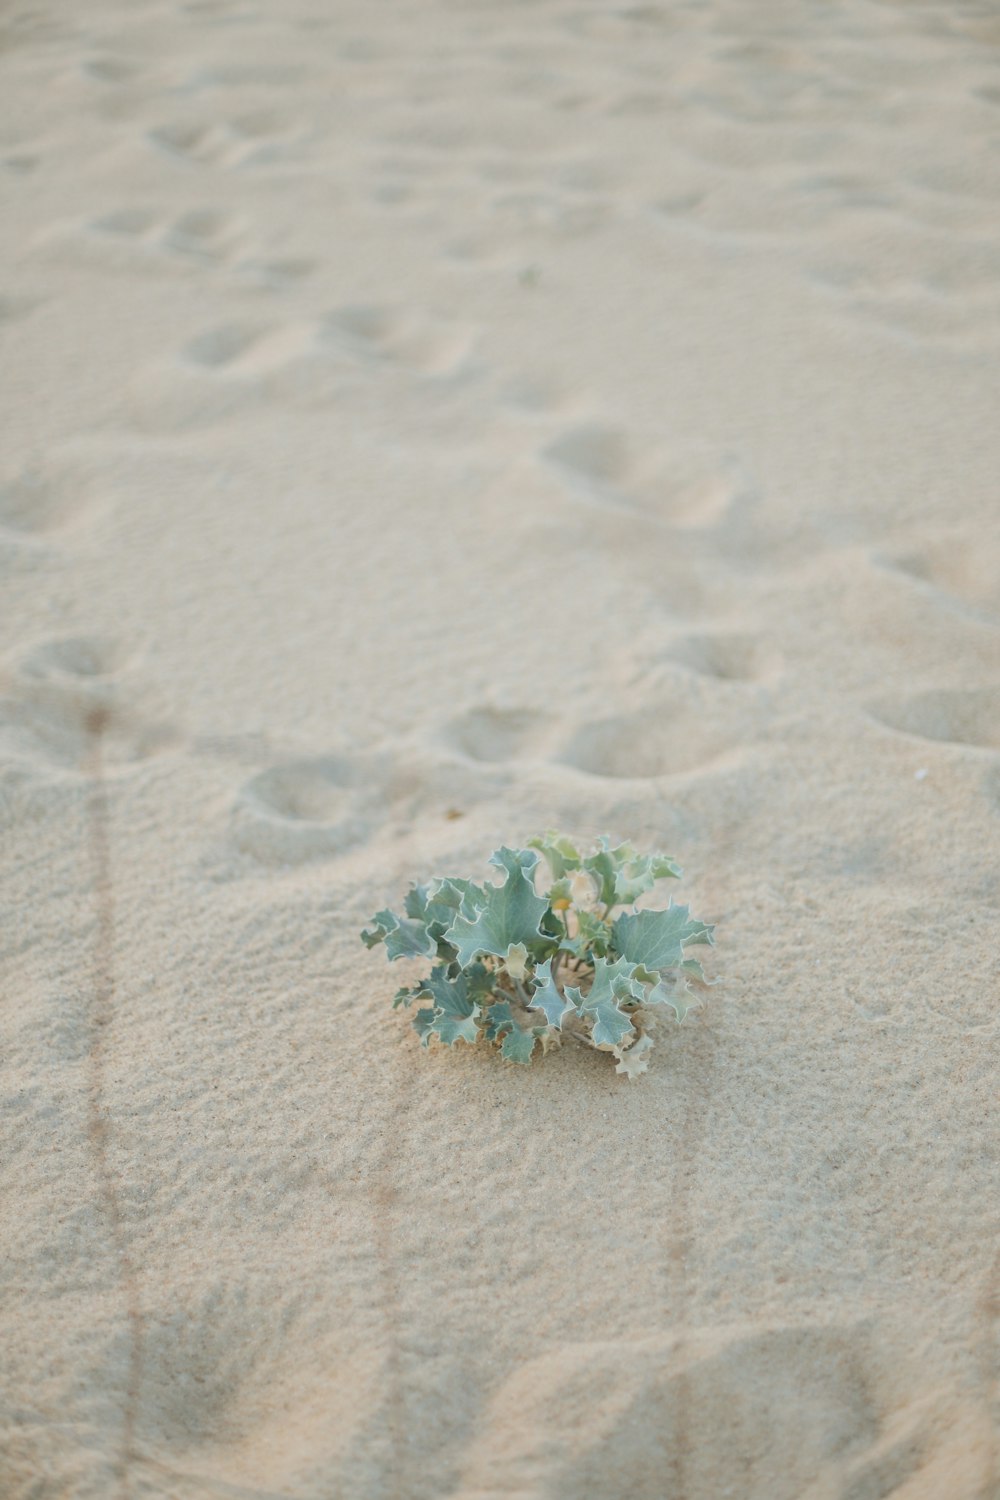 a plant on the sand